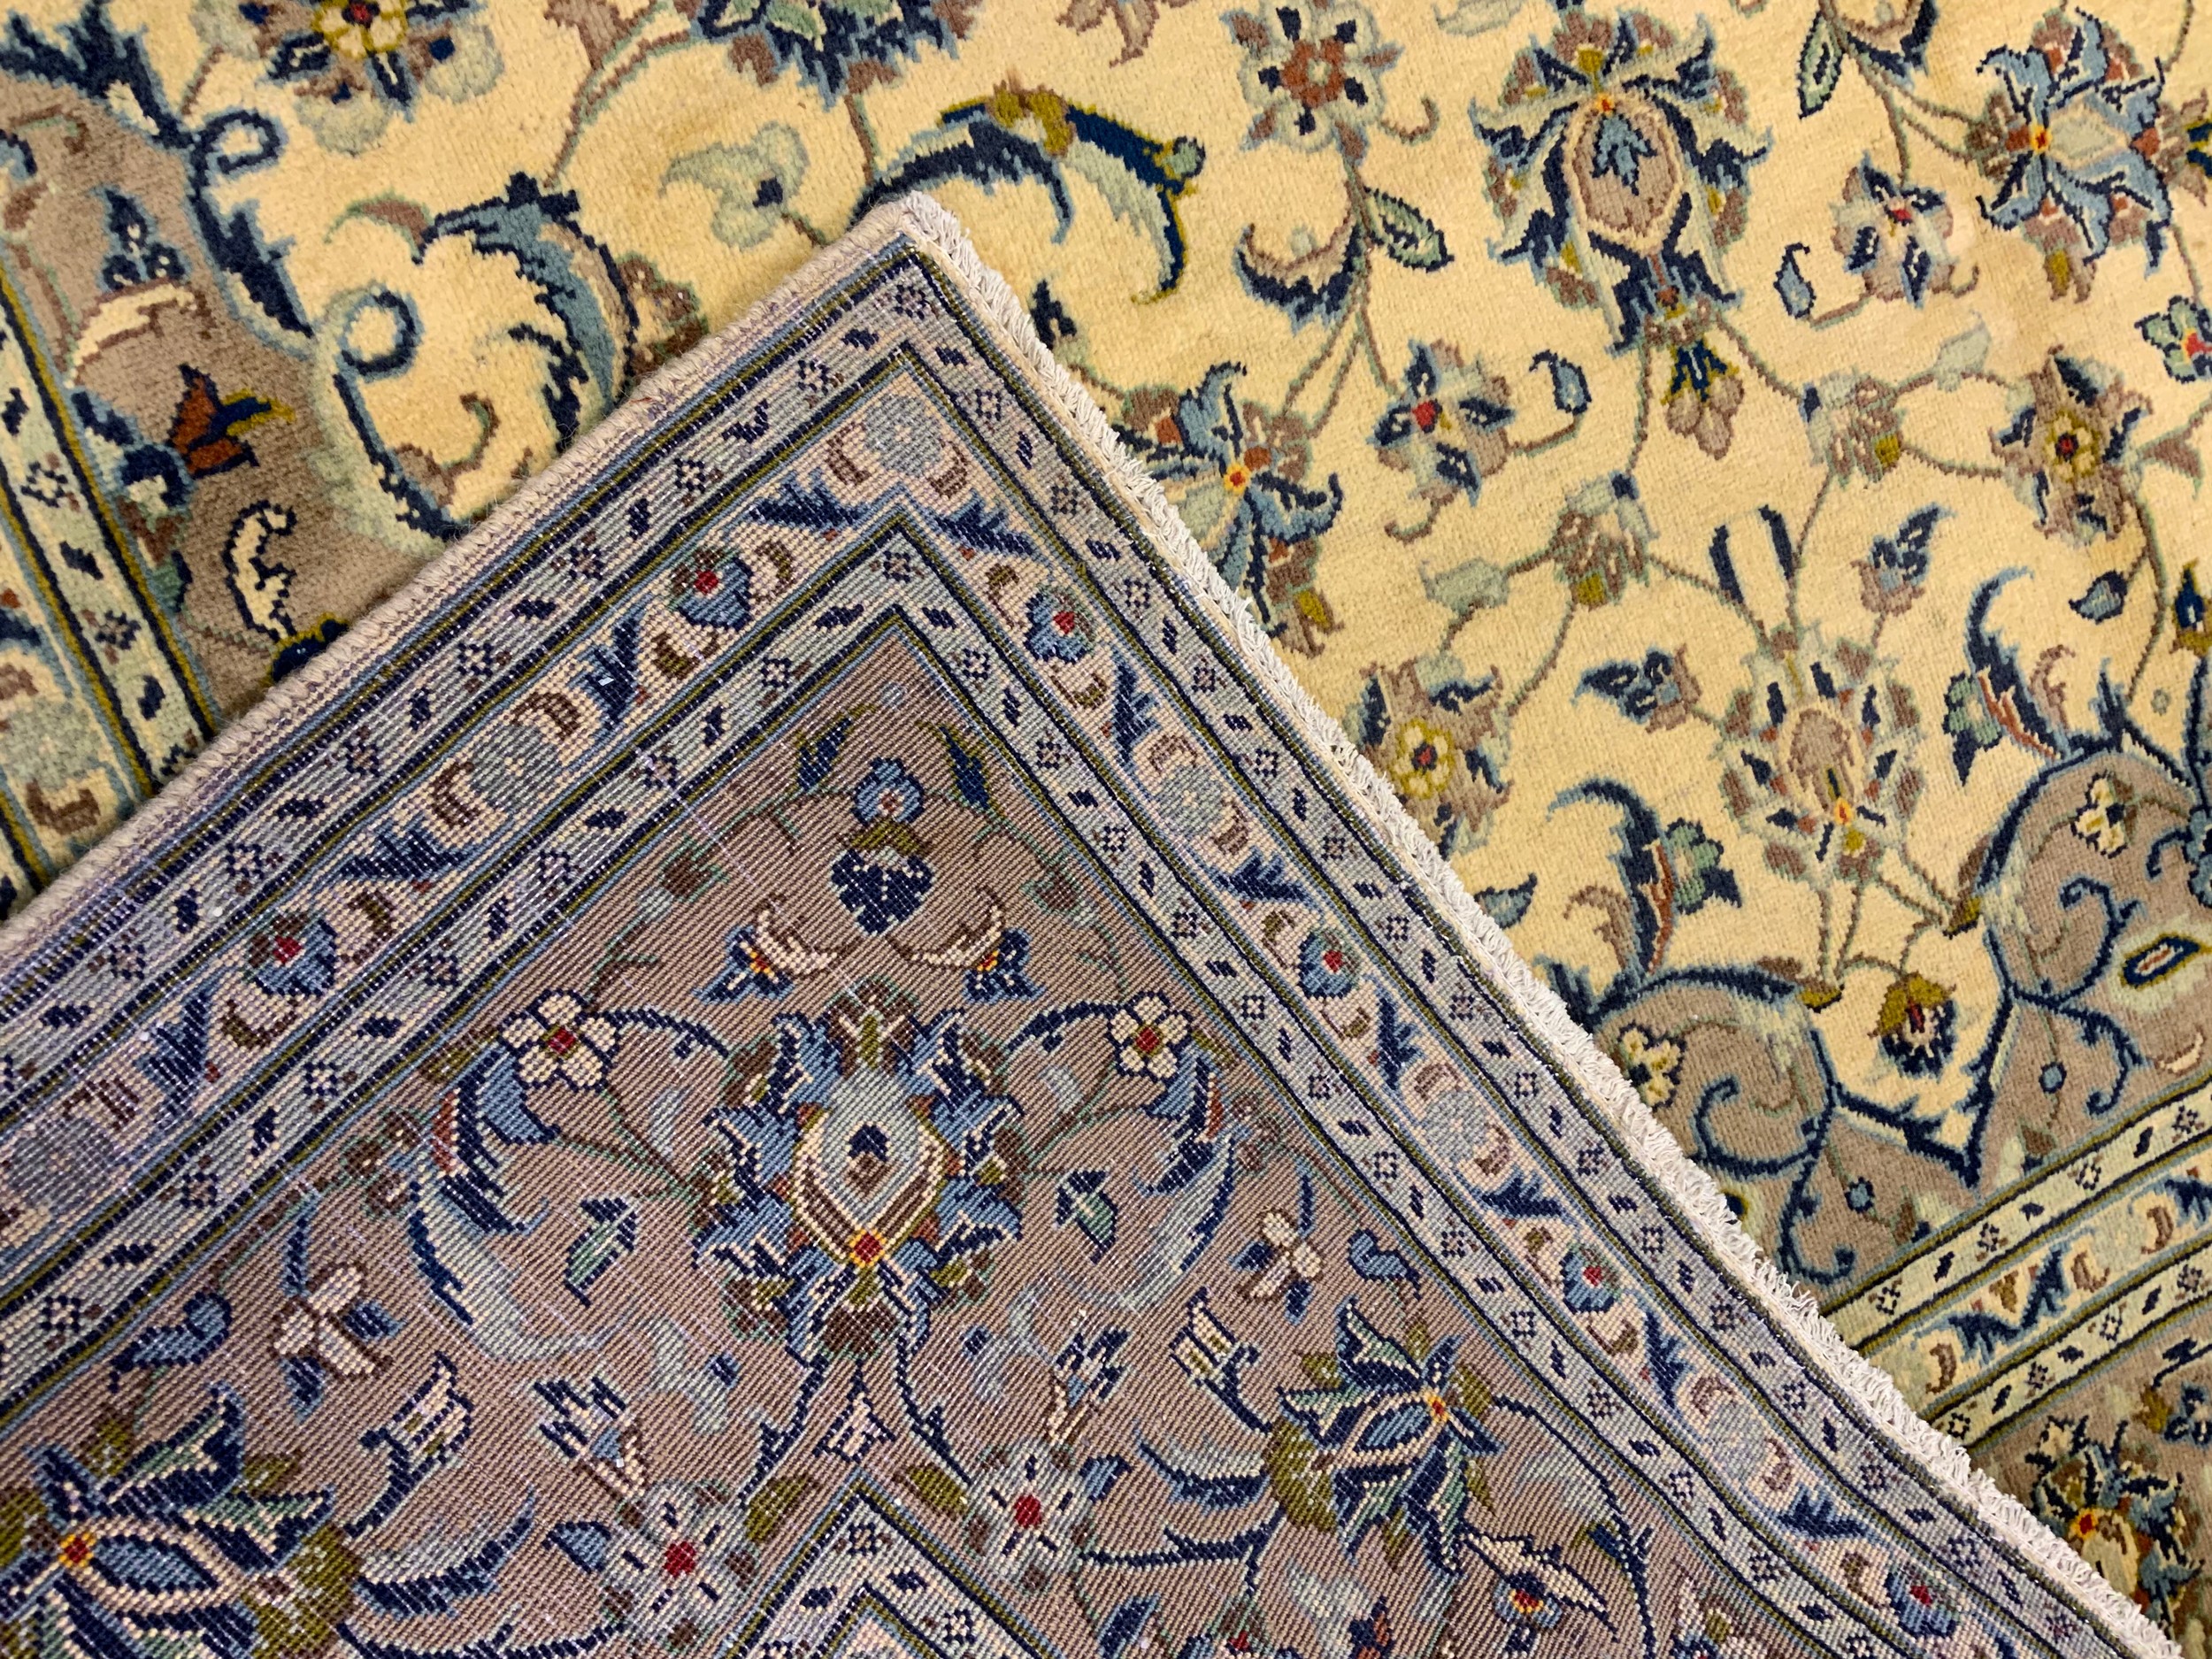 A fine Kashan rug / carpet, woven in muted tones of grey, blue, and cream, 310cm x 205cm. - Image 2 of 2